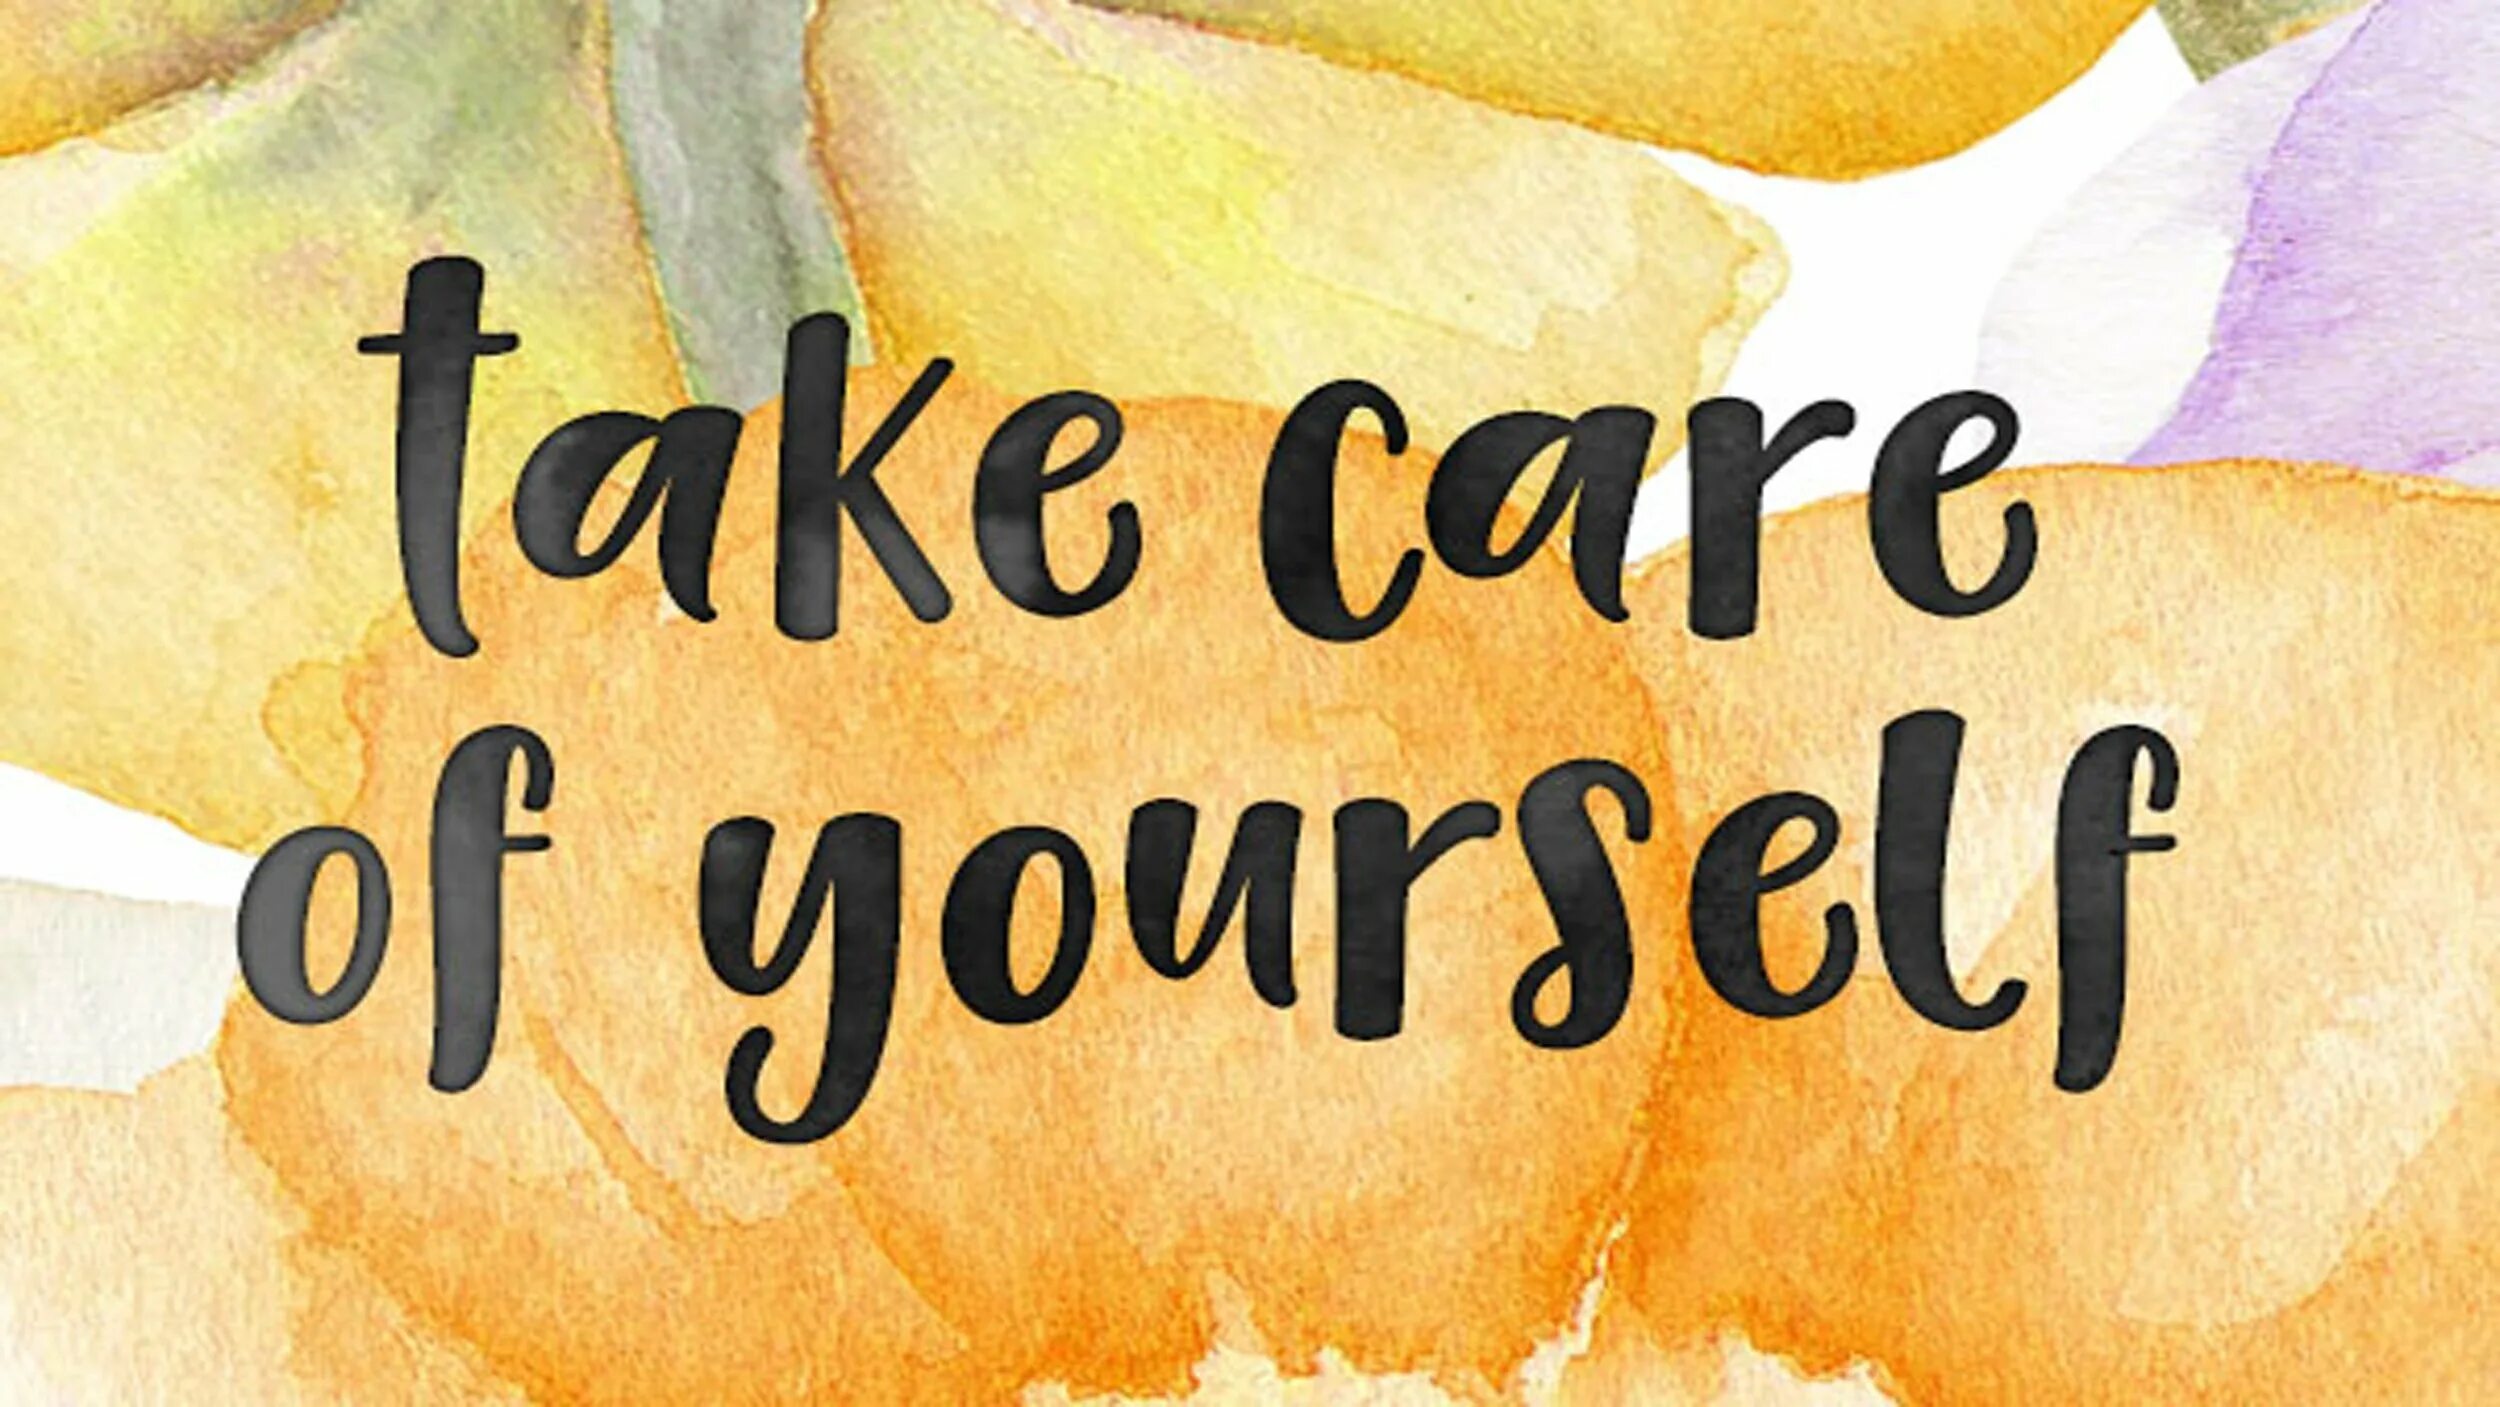 Take Care of yourself. Take Care about yourself. Take Care of yourself картинки. Care for yourself рисунки. Take care and be good